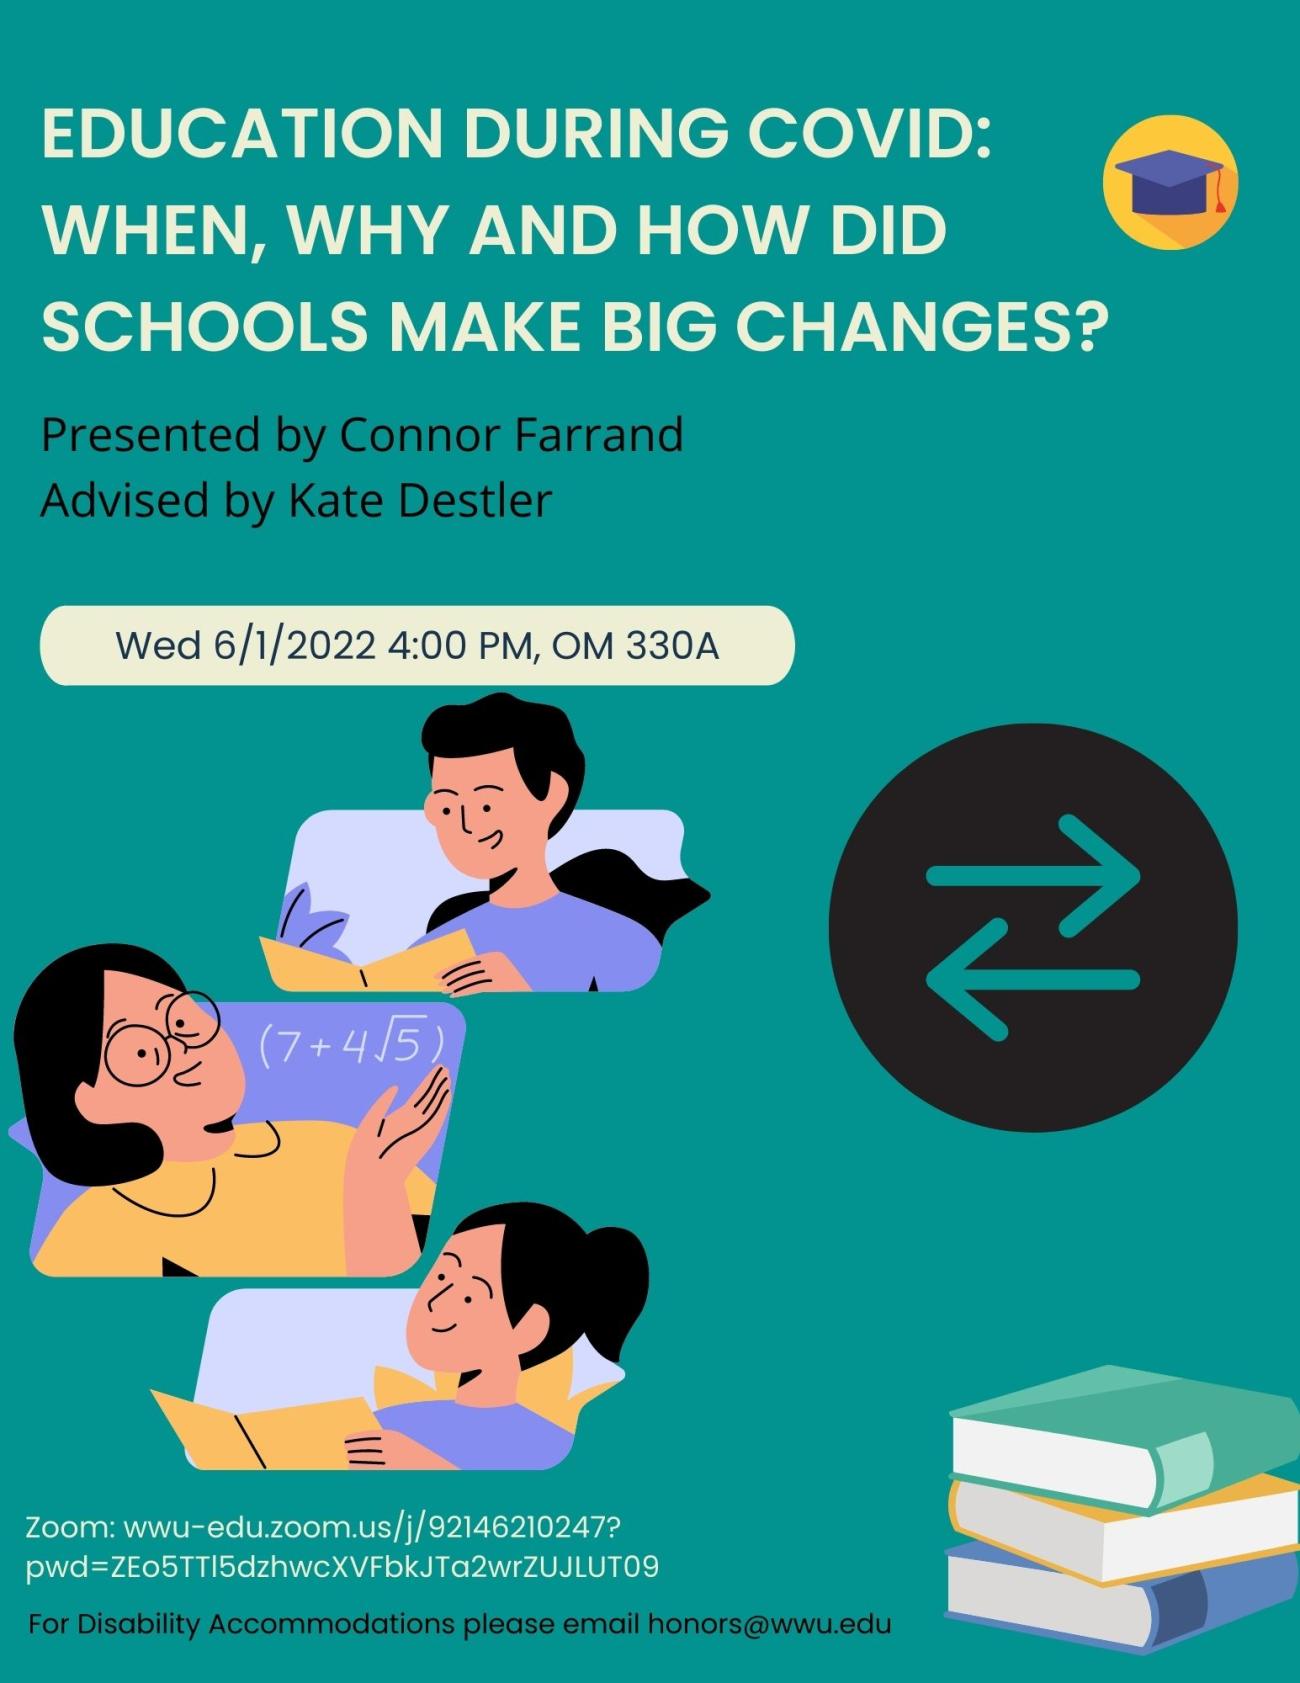 A poster with a turquoise background with text that reads: "Education during COVID: When, Why, and How did schools make big changes? Presented by Connor Farrand, Advised by Kate Destler. Presentation time 6/3/2022 at 5pm in Old Main 330A. For Disability Accommodations, please email honors@wwu.edu." 